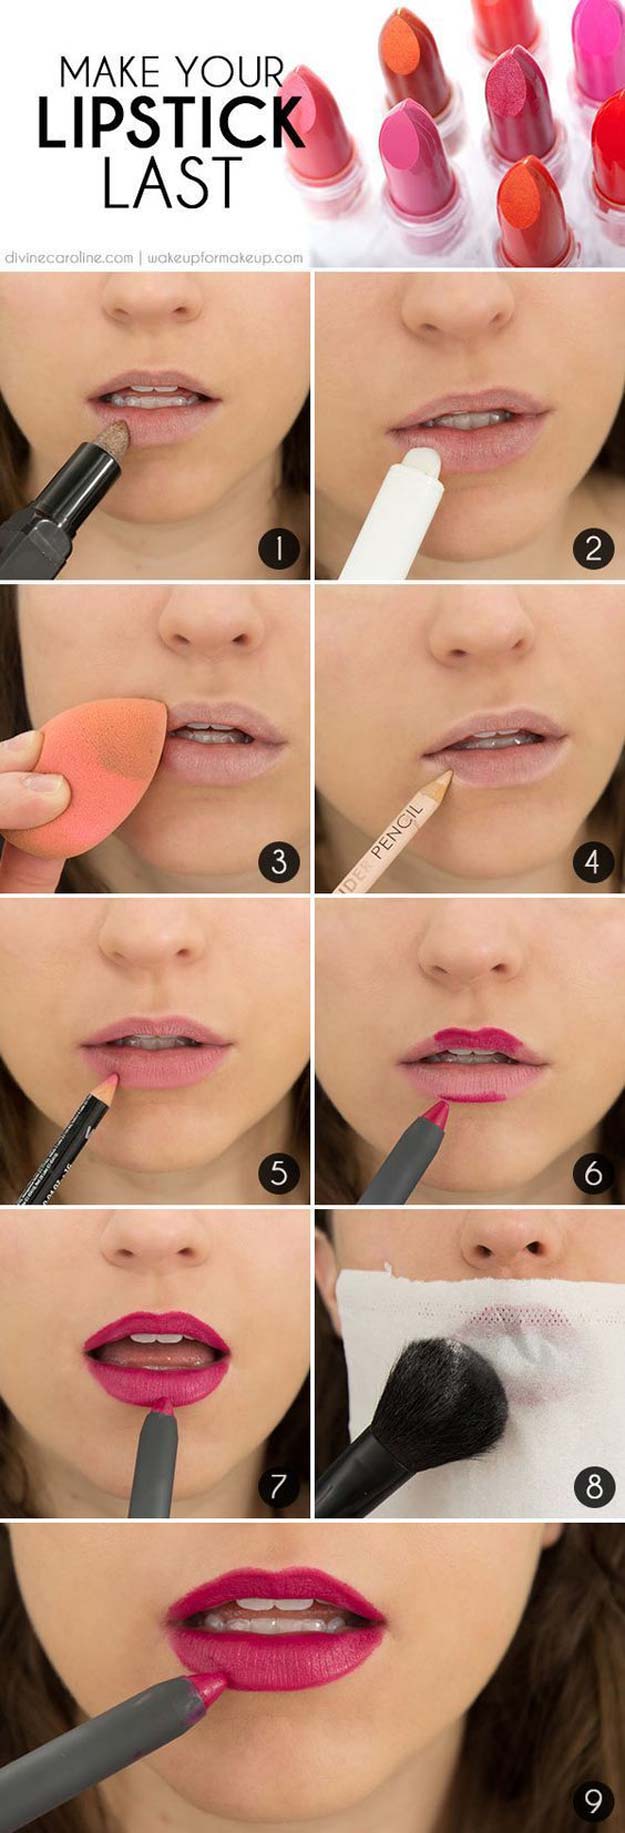 Lipstick Tutorials - Best Step by Step Makeup Tutorial How To - The Secret to Long-Lasting Lipstick - Easy and Quick Ways to Apply Lipstick and Awesome Beauty Ideas - Cool Ideas for Teen Makeup for School, Party and Special Occasion - Makeup Tutorials for Beginners - Lip Liner Tips and Tricks to Add Volume, DIY Lip Techniques for Fuller Lips - DIY Projects and Crafts for Teens 